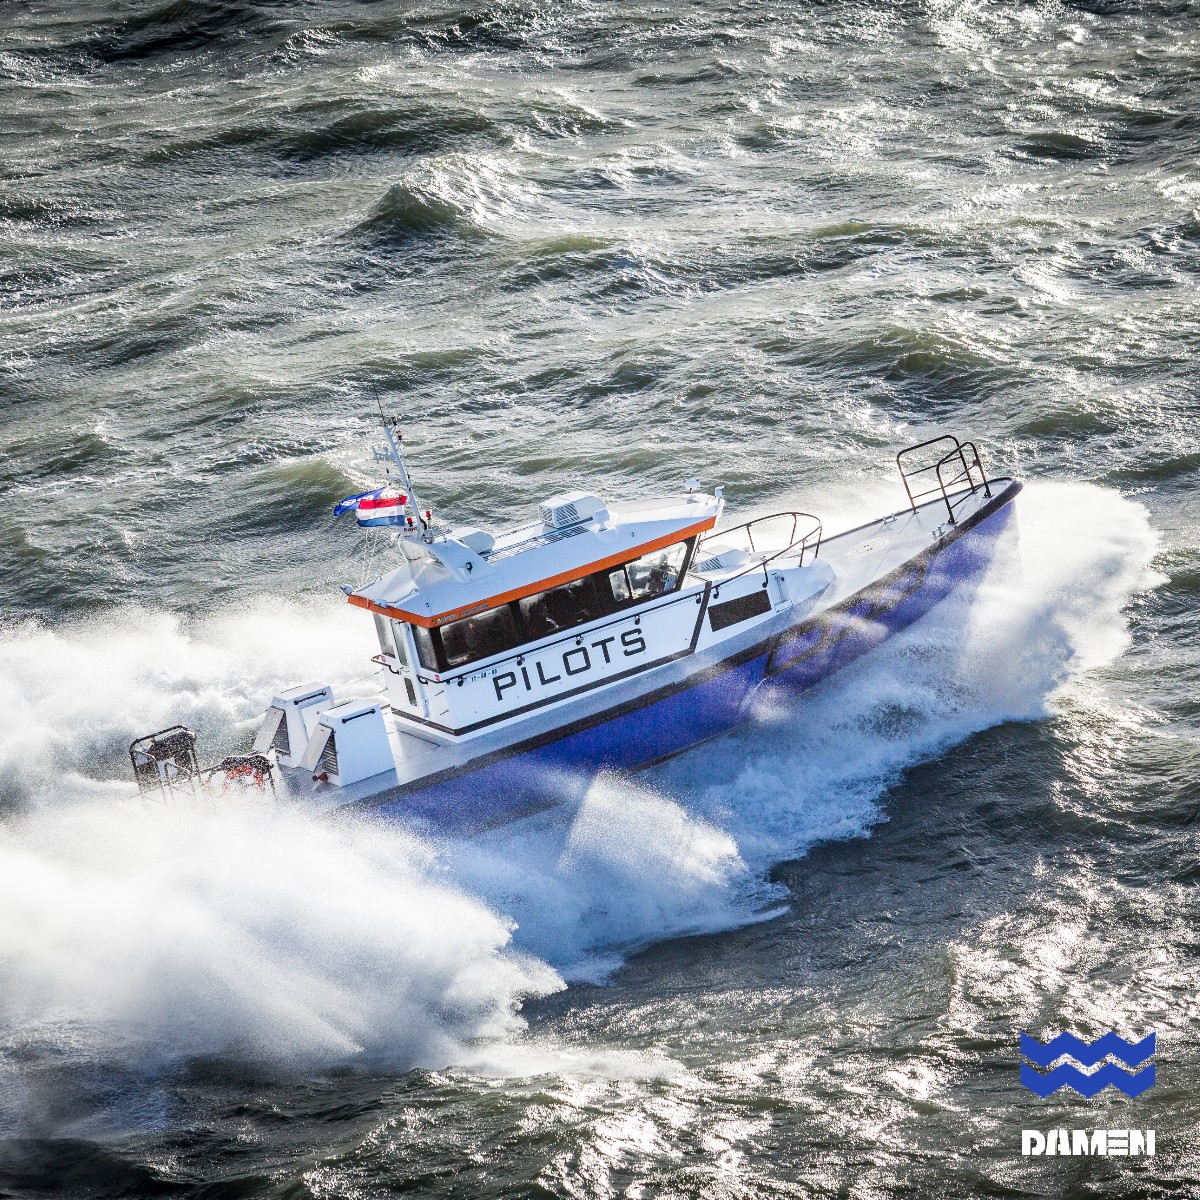 Lightweight and low maintenance, composite vessels offer the potential to reduce your costs of operation. And, with lower fuel consumption, even at high speeds, your sustainability goals get a boost courtesy of reduced emissions.